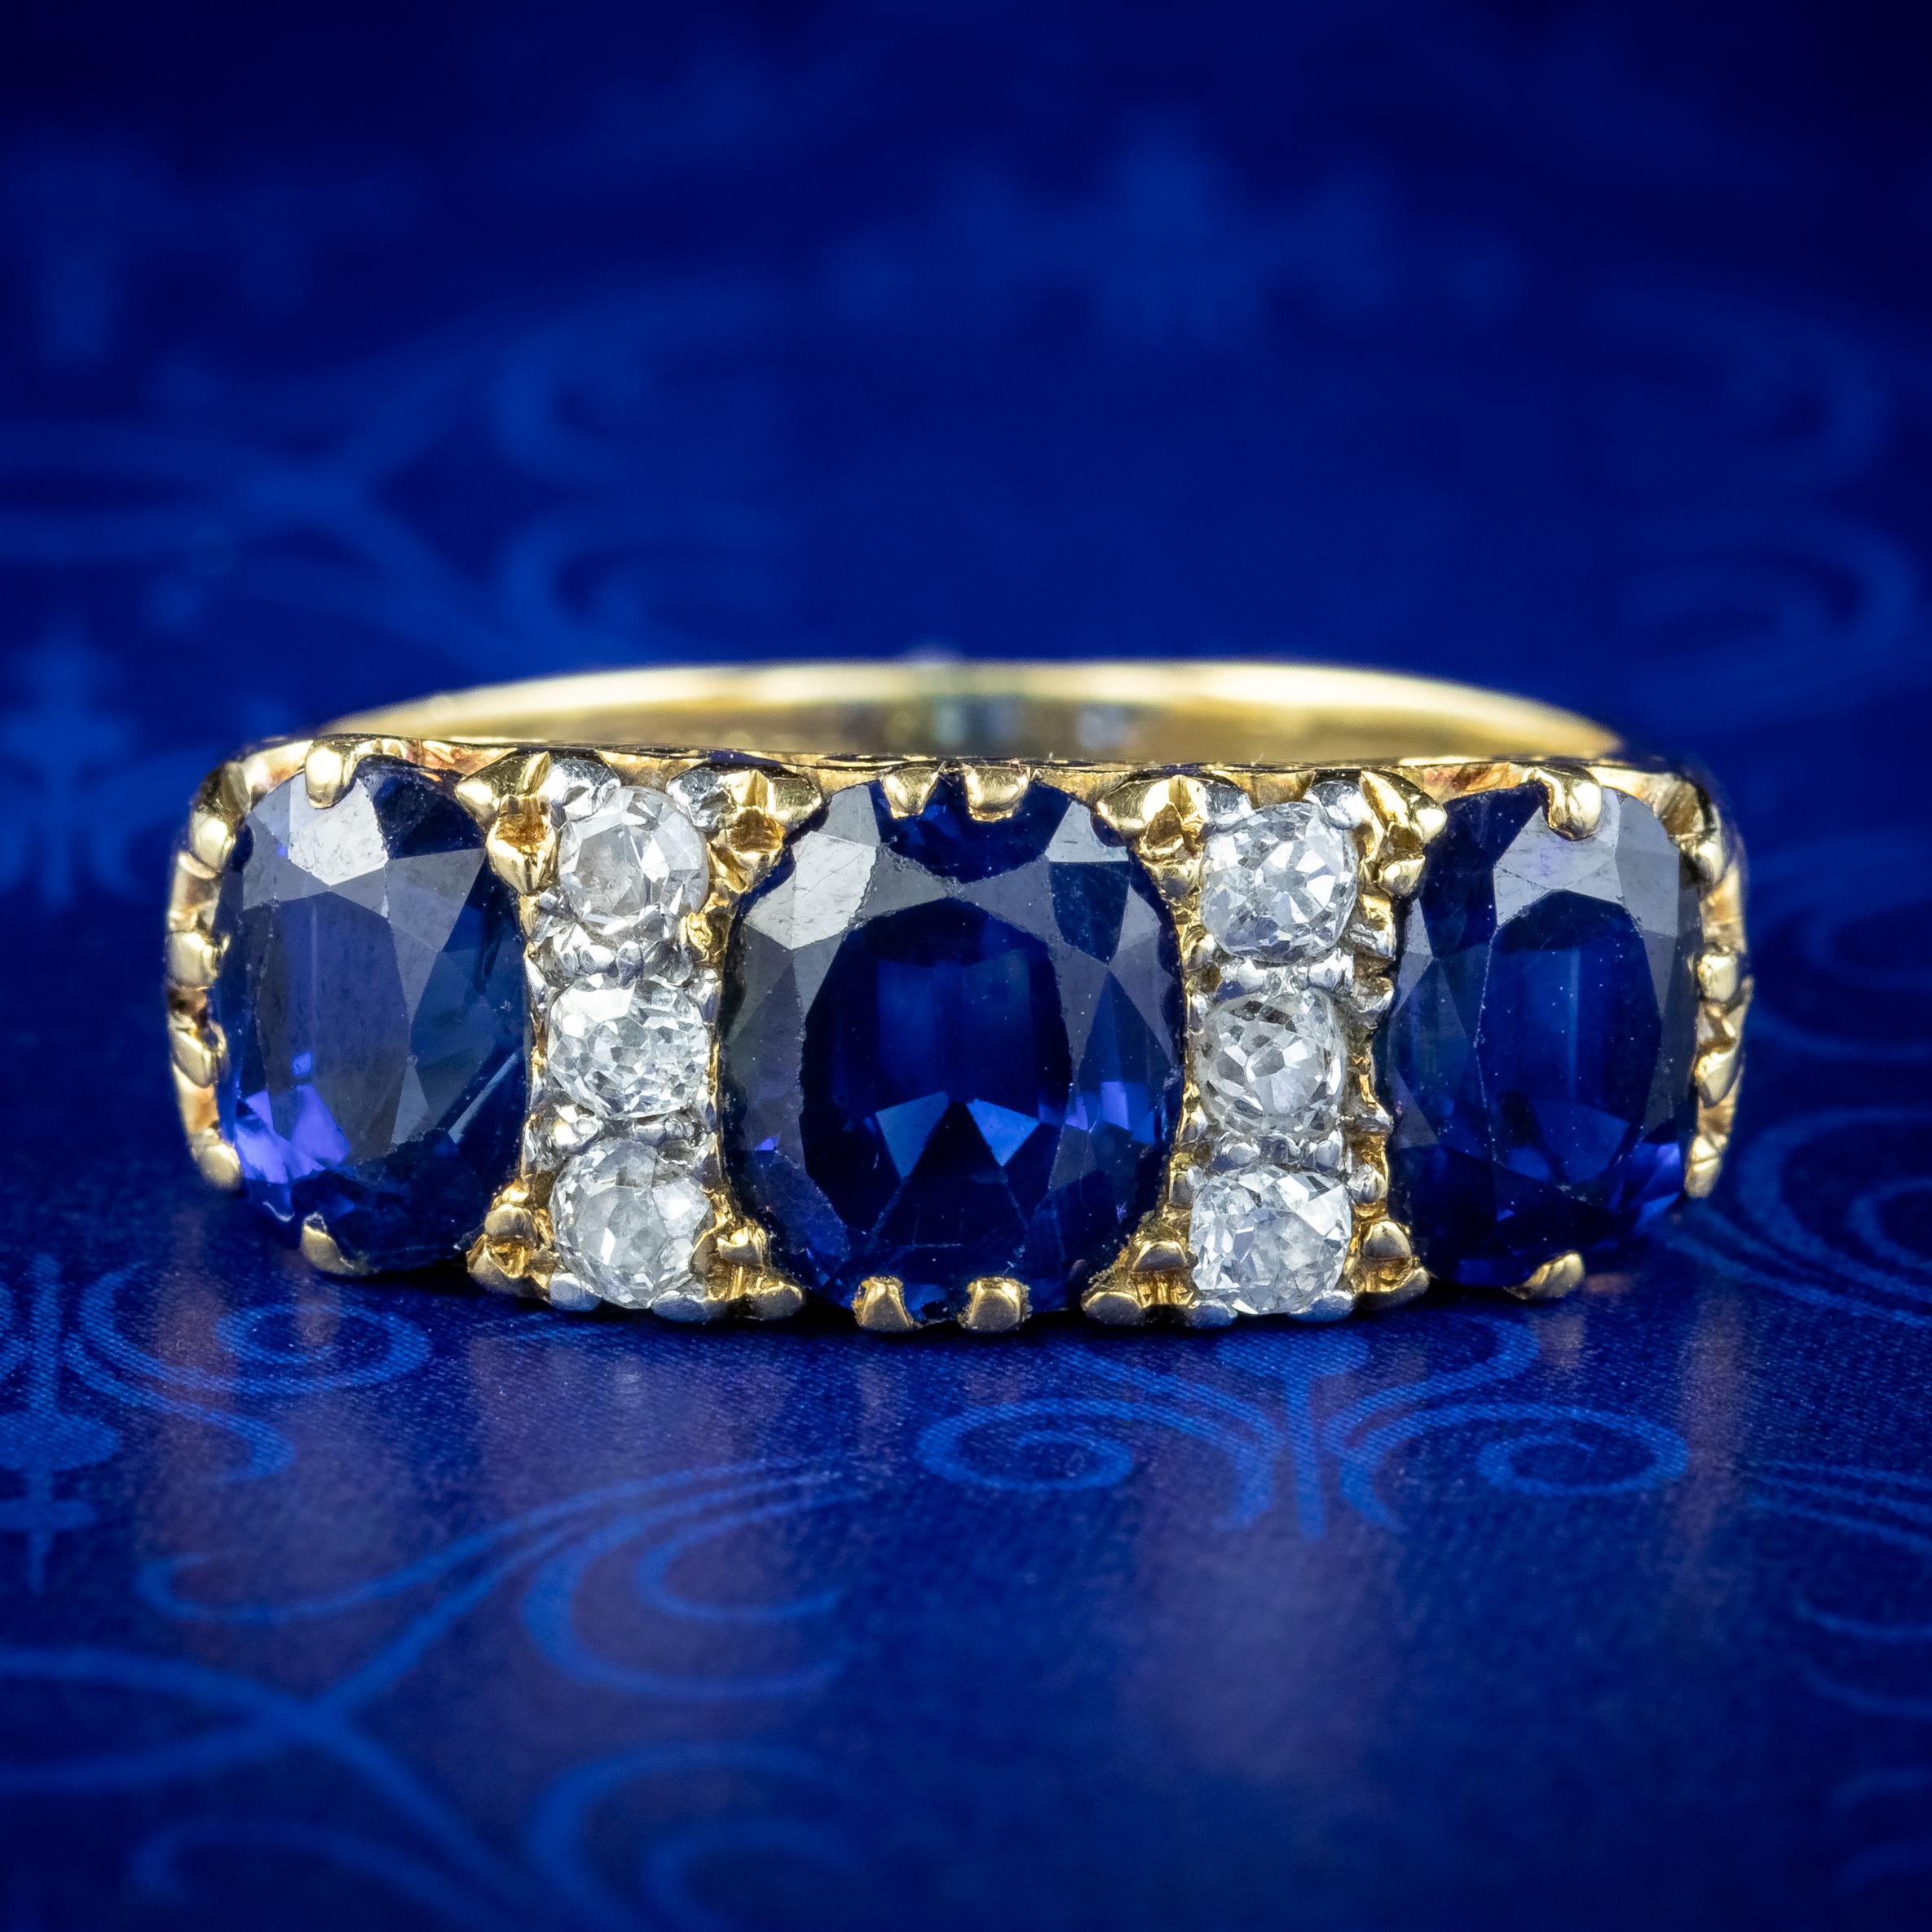 A magnificent antique Edwardian carved half hoop ring boasting a trilogy of natural blue sapphires weighing approx. 1.1ct in the centre and 0.80ct at the sides (approx. 2.7ct total). They have a regal deep blue hue and are complemented by six